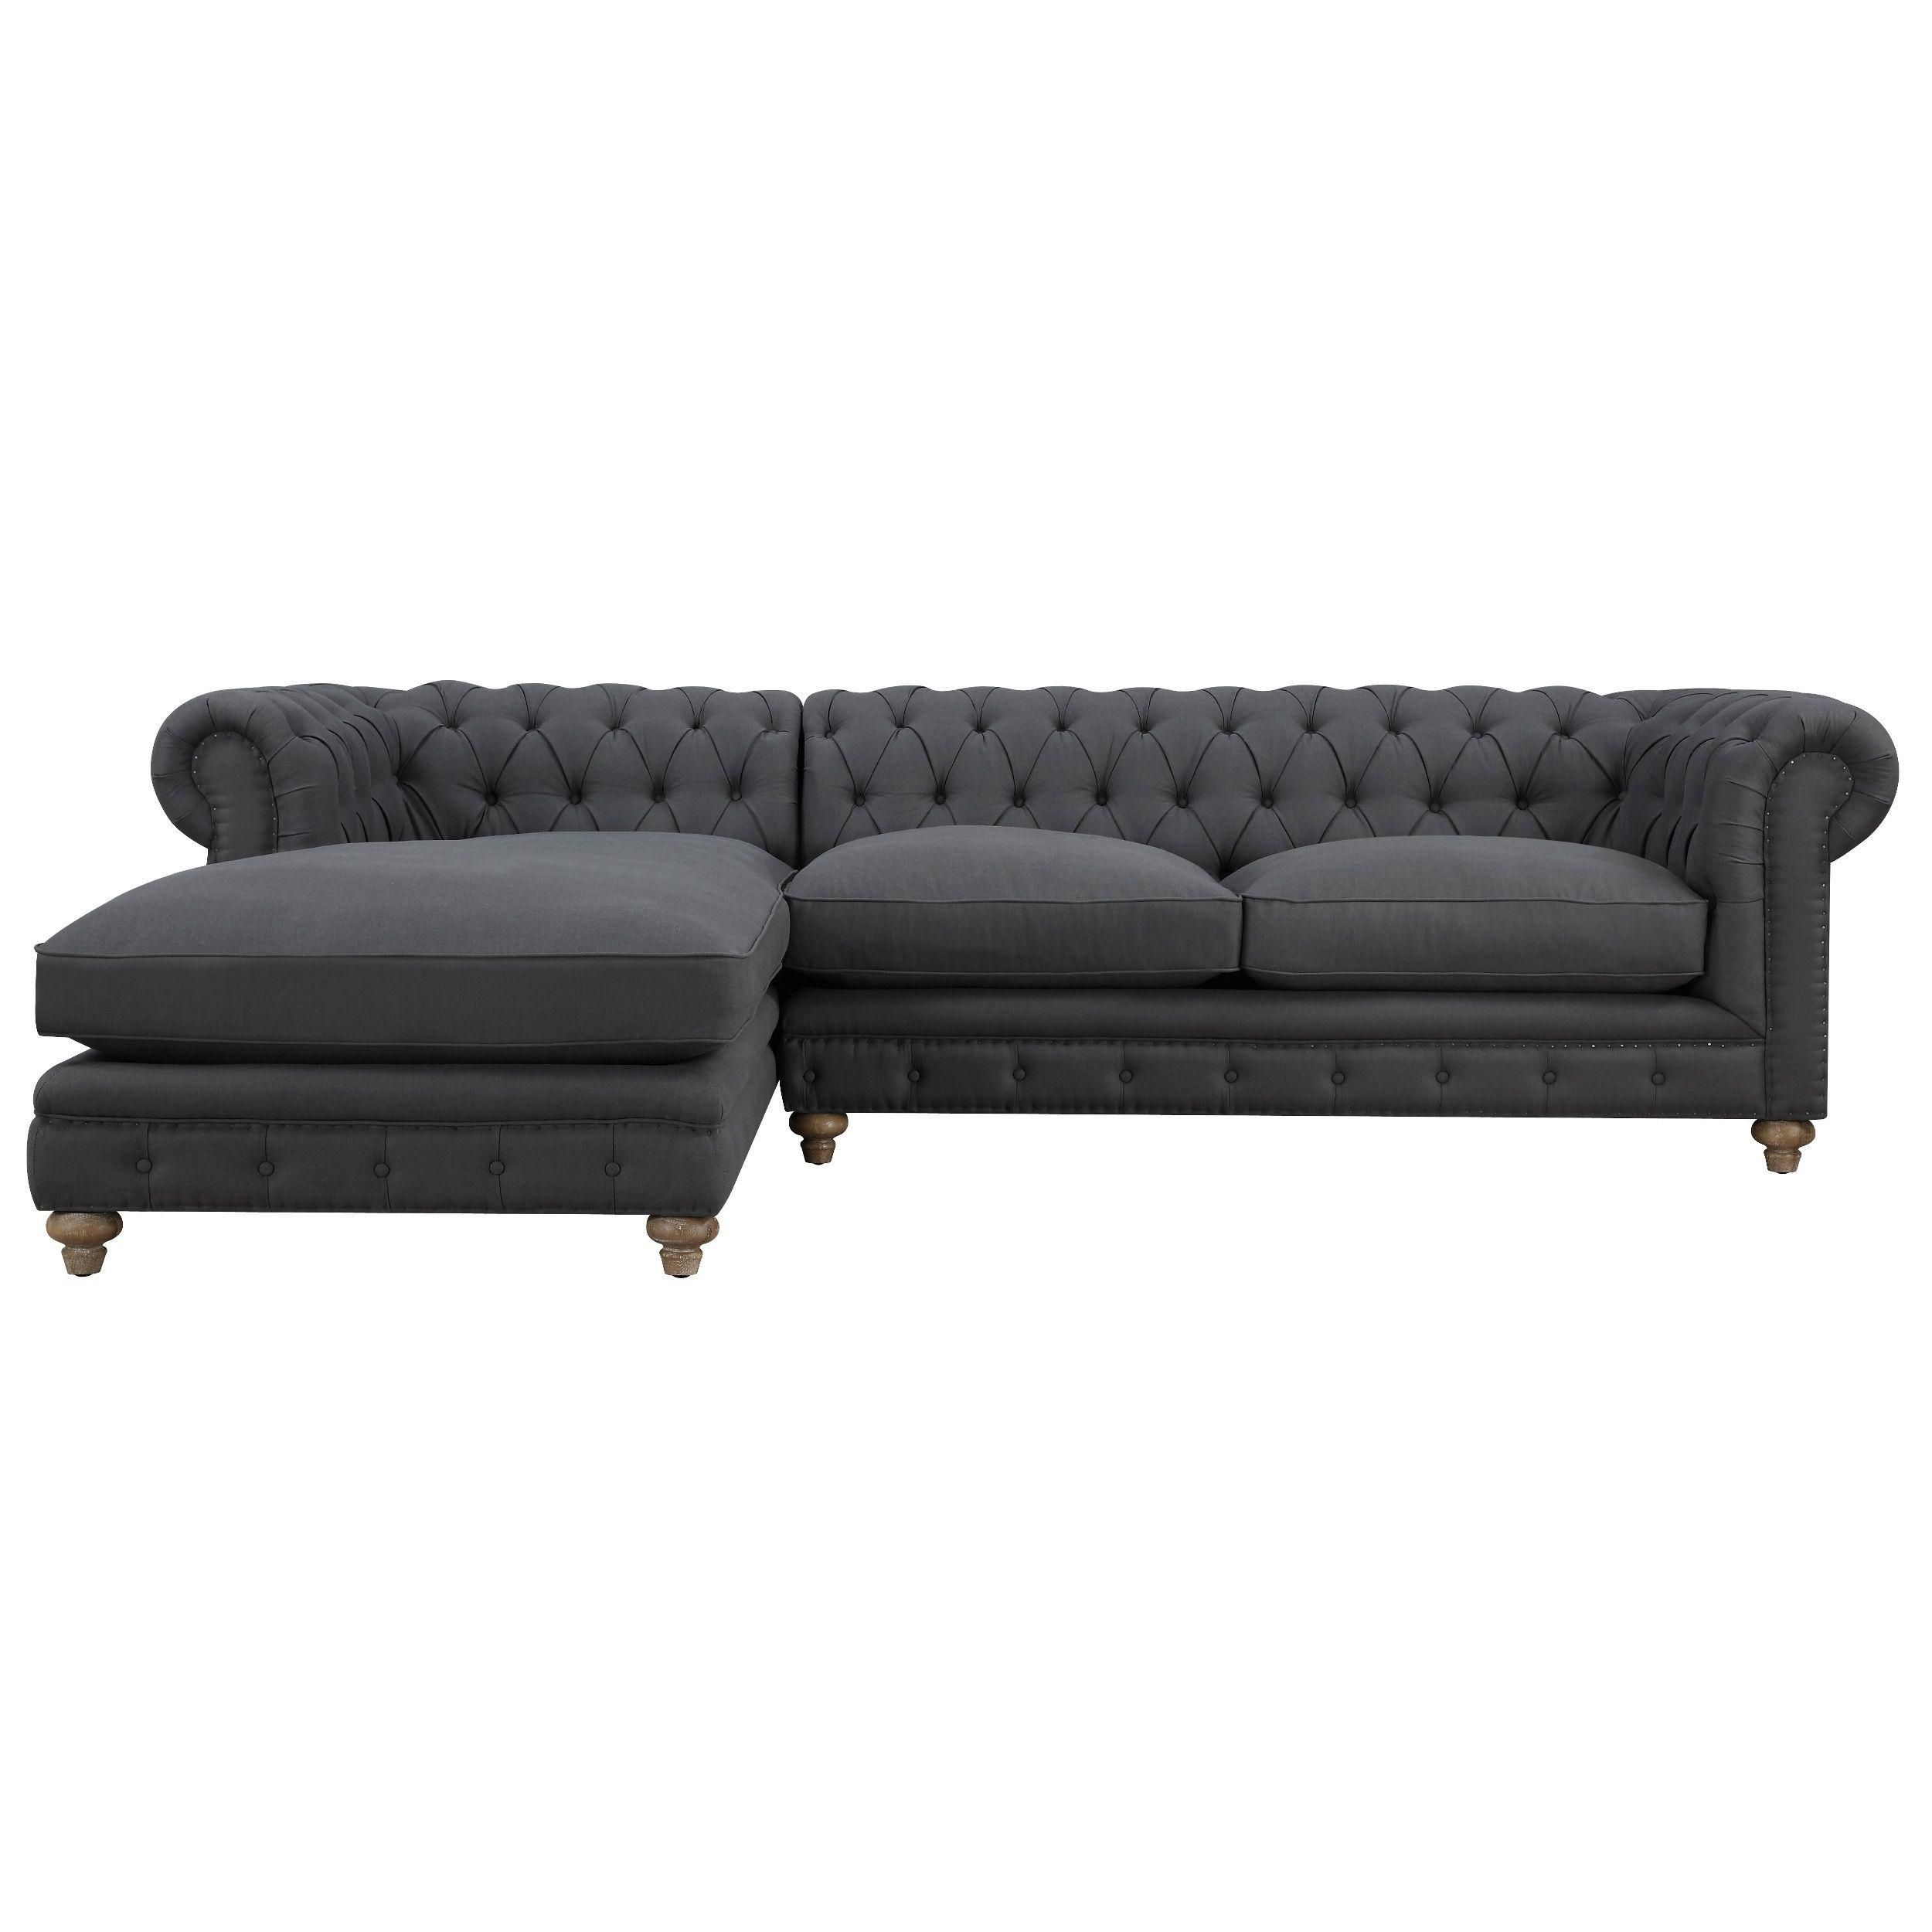 Furniture: Sears Canada Couches | Sears Couch | Sectional Sofa Pertaining To Sears Sofa (View 2 of 20)